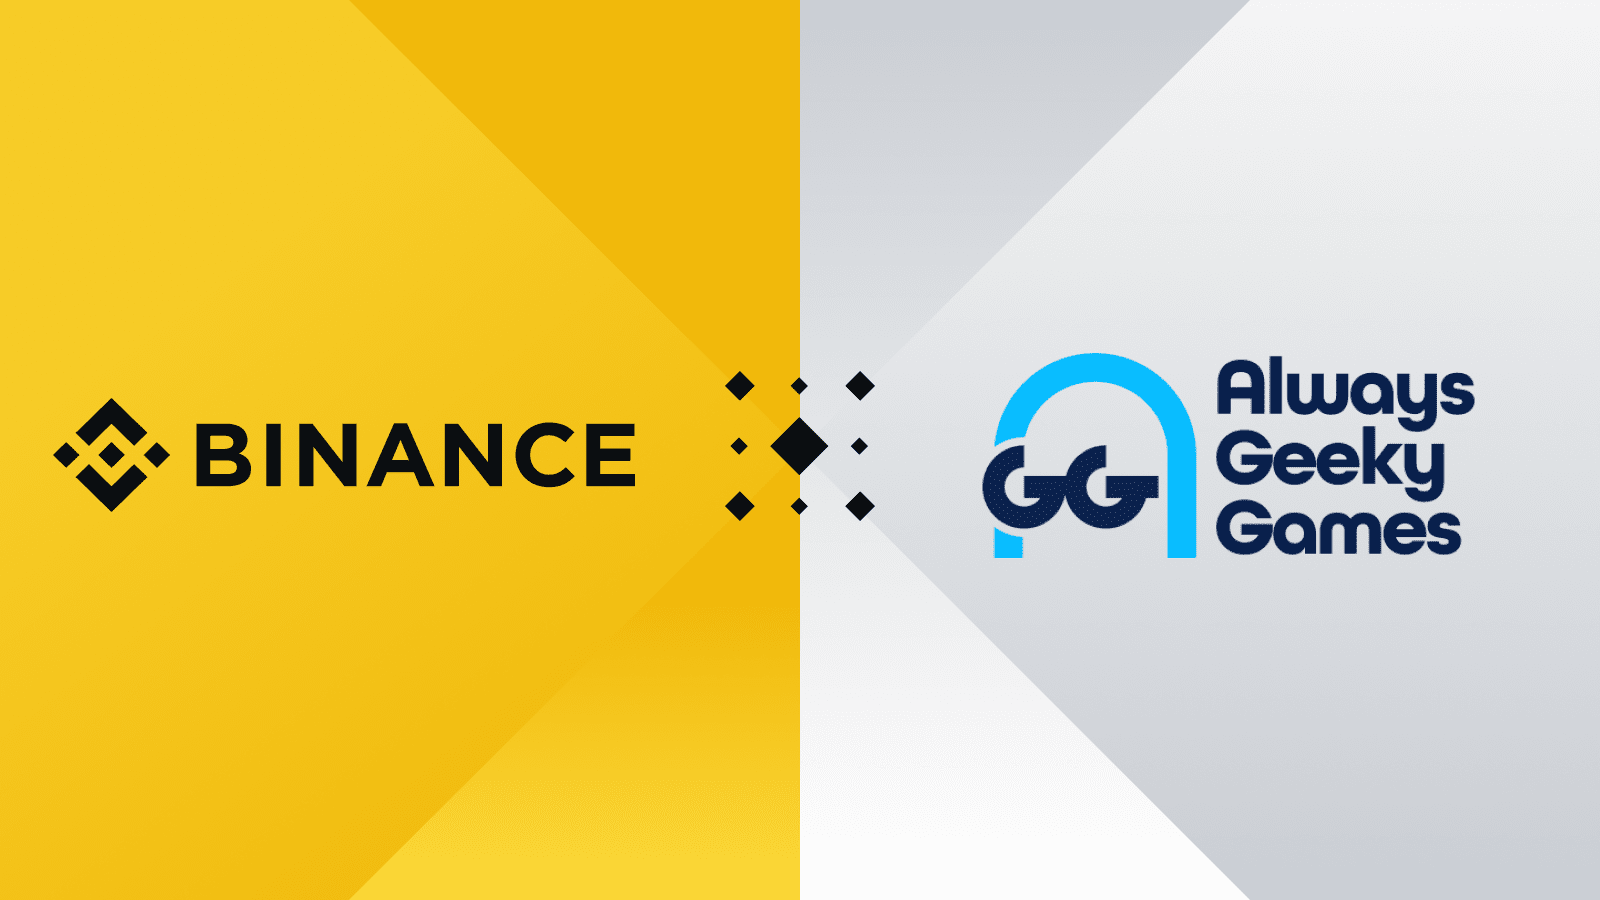 Binance Labs Makes Strategic Investment in AlwaysGeeky Games for Enhanced Blockchain Free-To-Play Tactical RPG Game